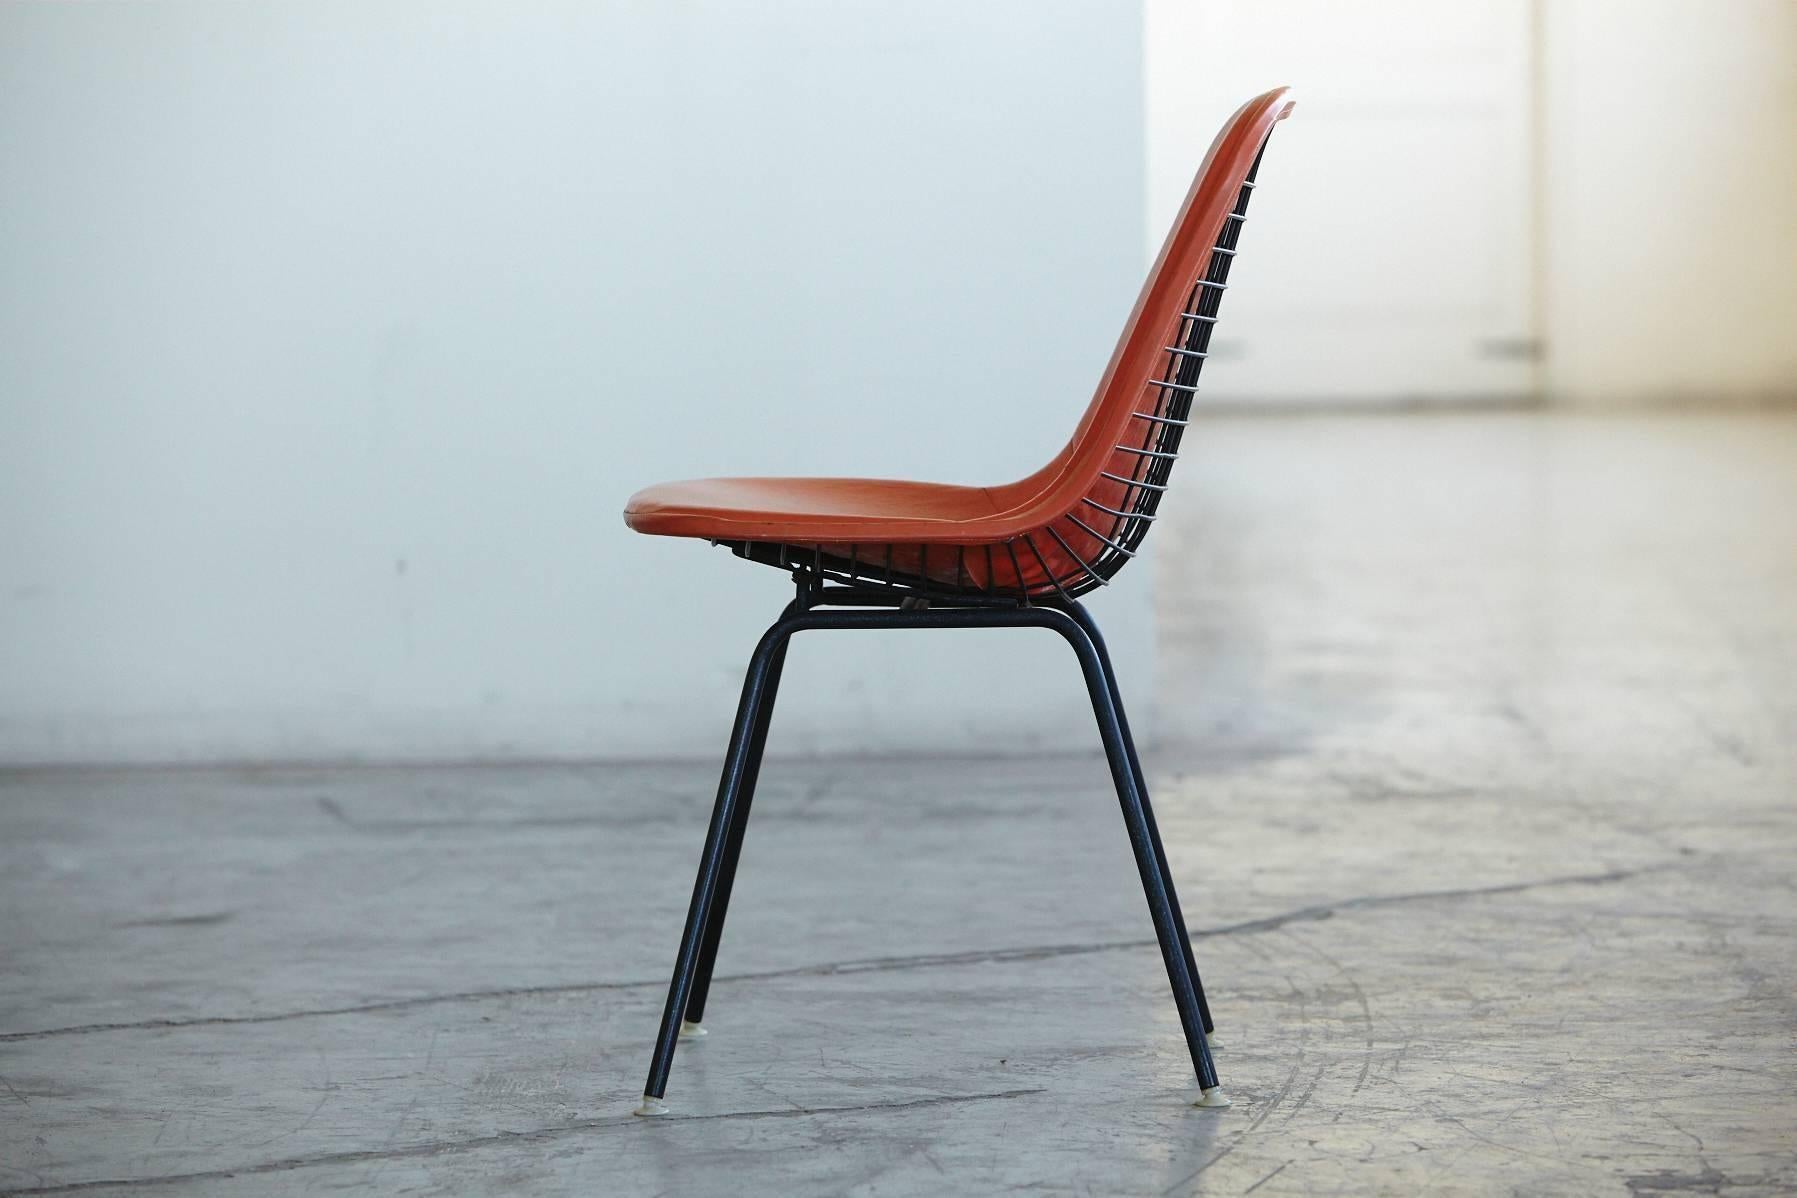 Original Eames DKX-1 Side Chair in Orange Leather for Herman Miller, 1960s For Sale 1